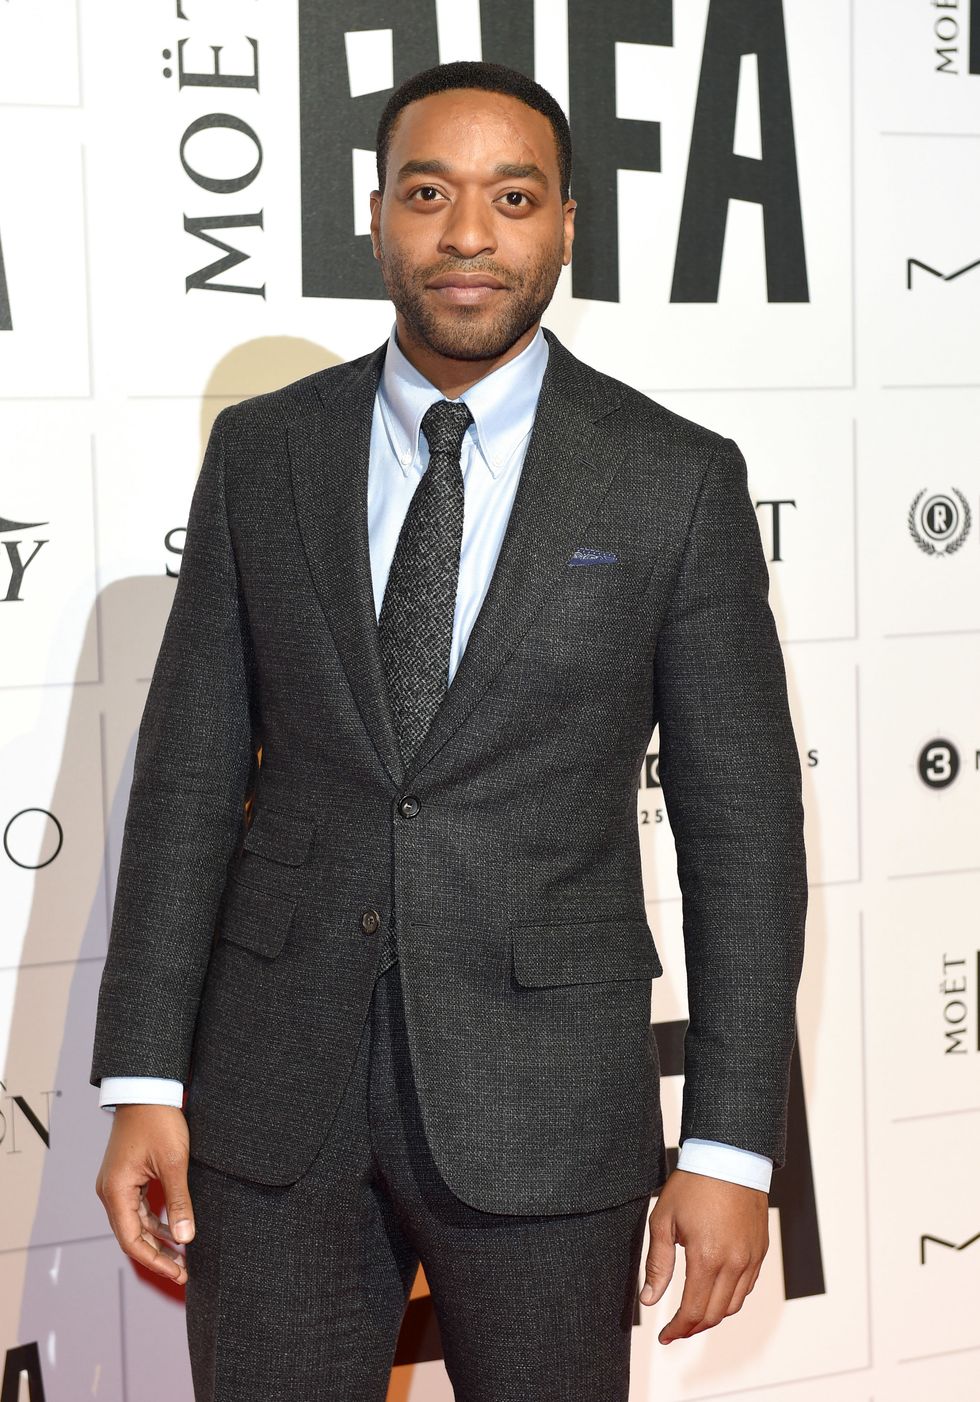 LONDON, ENGLAND - DECEMBER 06:  Chiwetel Ejiofor attends the Moet British Independent Film Awards at Old Billingsgate Market on December 6, 2015 in London, England.  (Photo by Karwai Tang/WireImage)